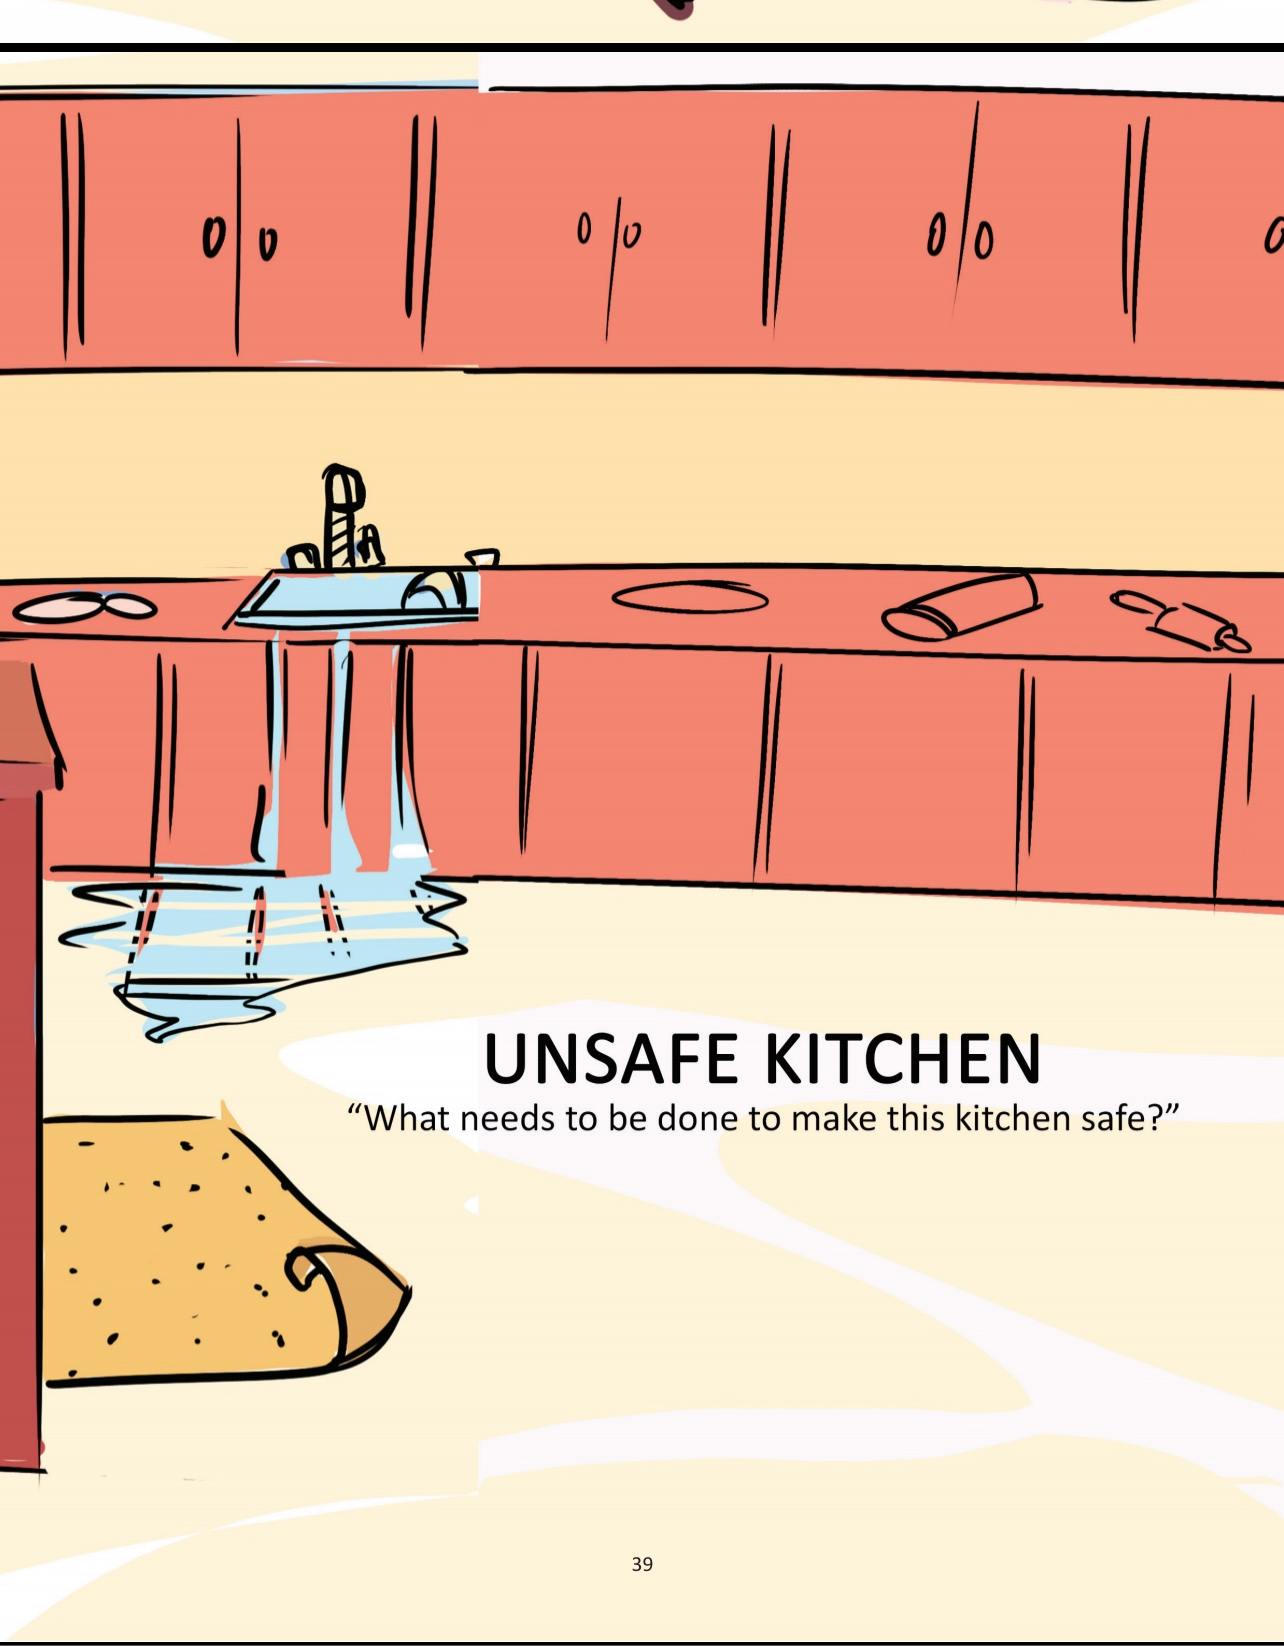 Nazzy Baker’s Kitchen and Food Safety Rules